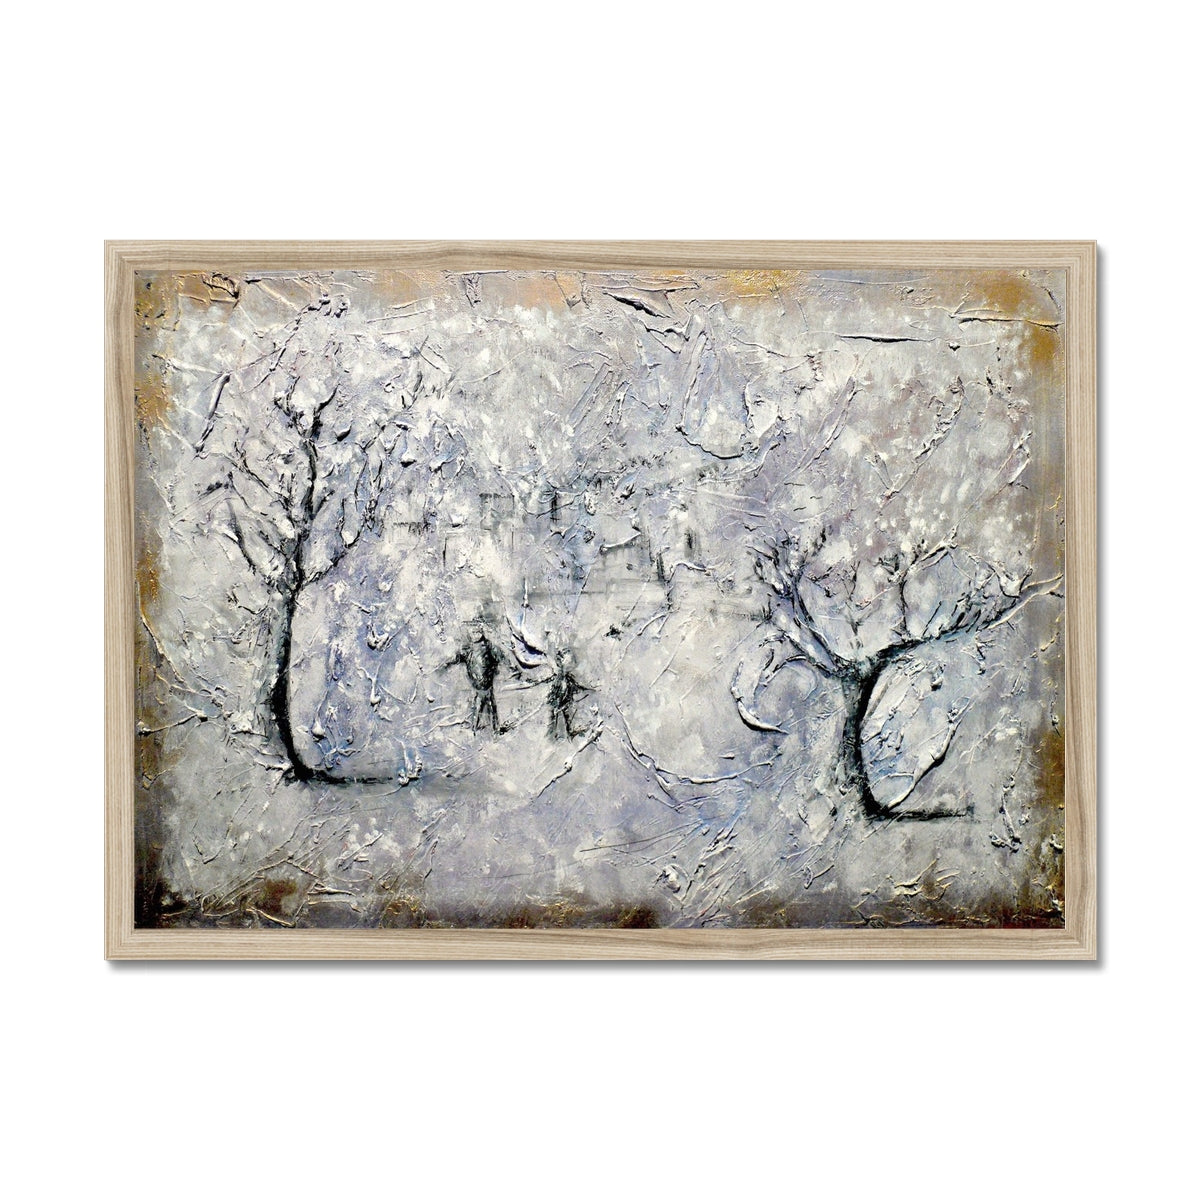 Father Daughter Snow Painting | Framed Prints From Scotland-Framed Prints-Abstract & Impressionistic Art Gallery-A2 Landscape-Natural Frame-Paintings, Prints, Homeware, Art Gifts From Scotland By Scottish Artist Kevin Hunter